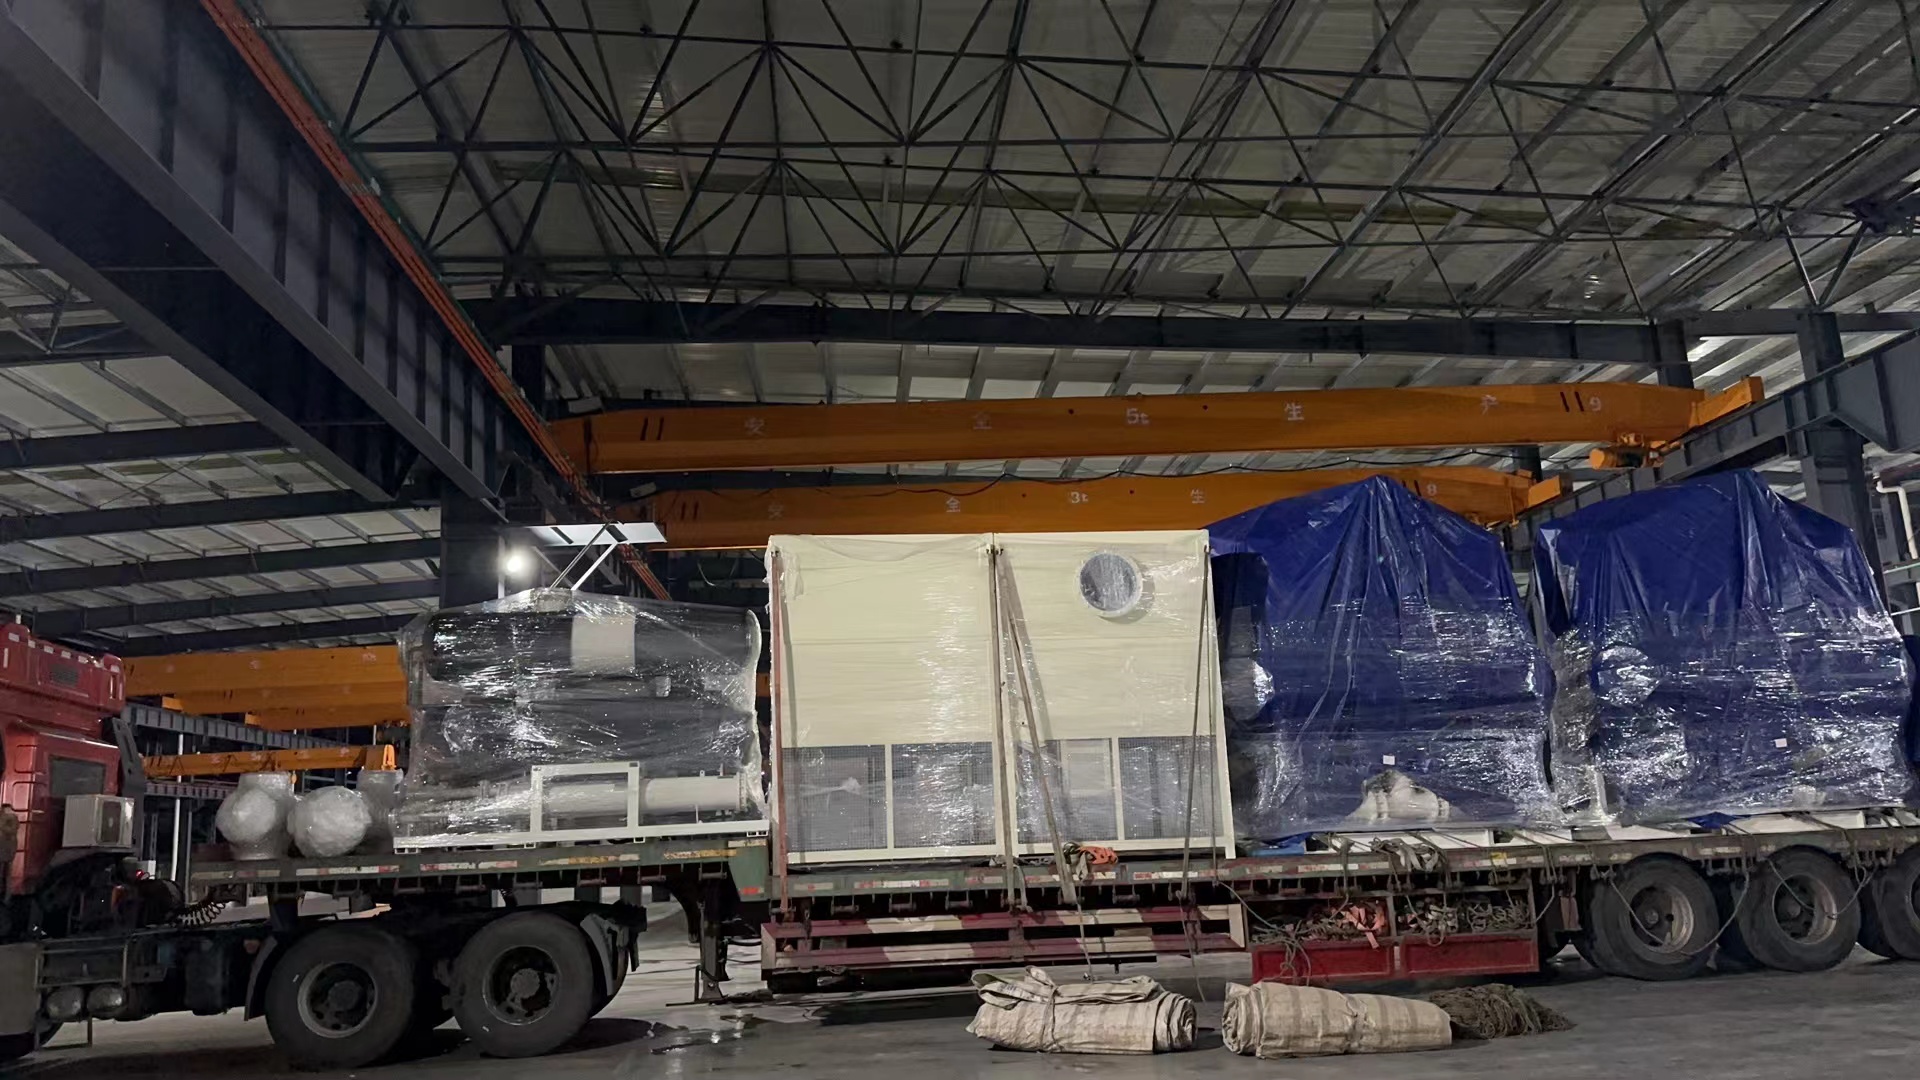 SAIFUAIR patted you. The cold dryer and suction dryer have been packed and will be shipped soon!